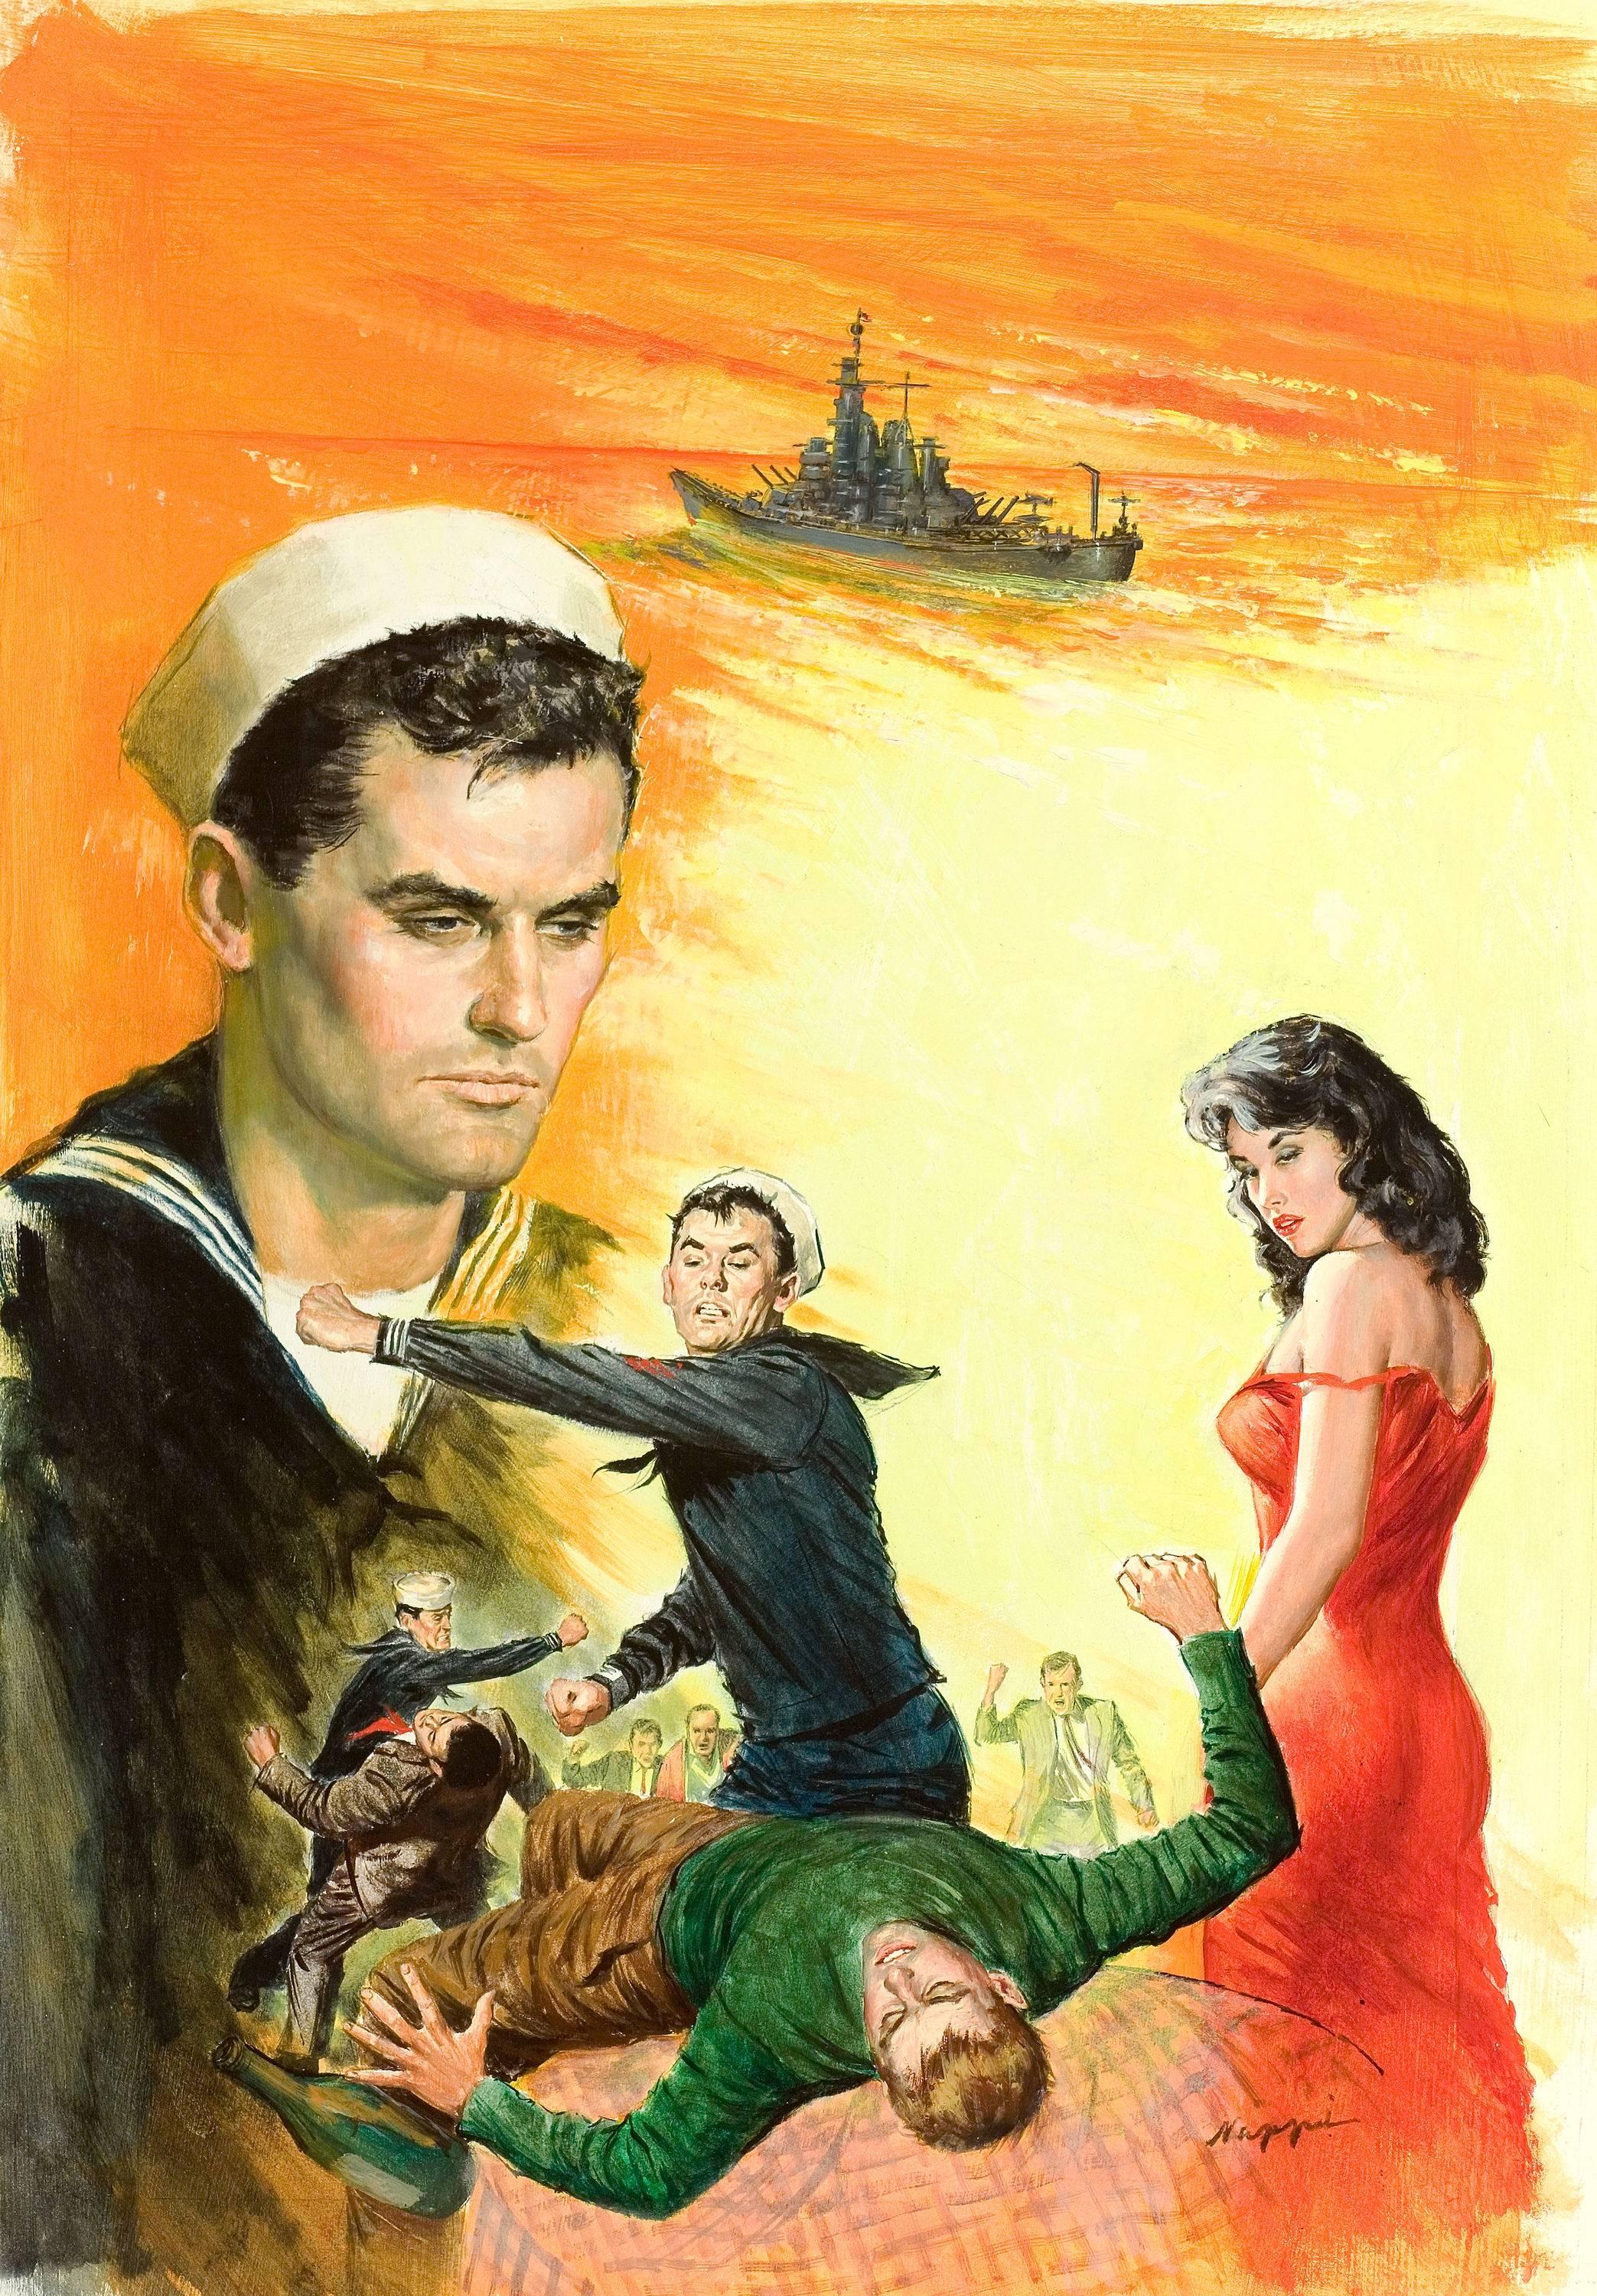 Rudy Nappi Figurative Painting - Four Year Hitch, Paperback Cover